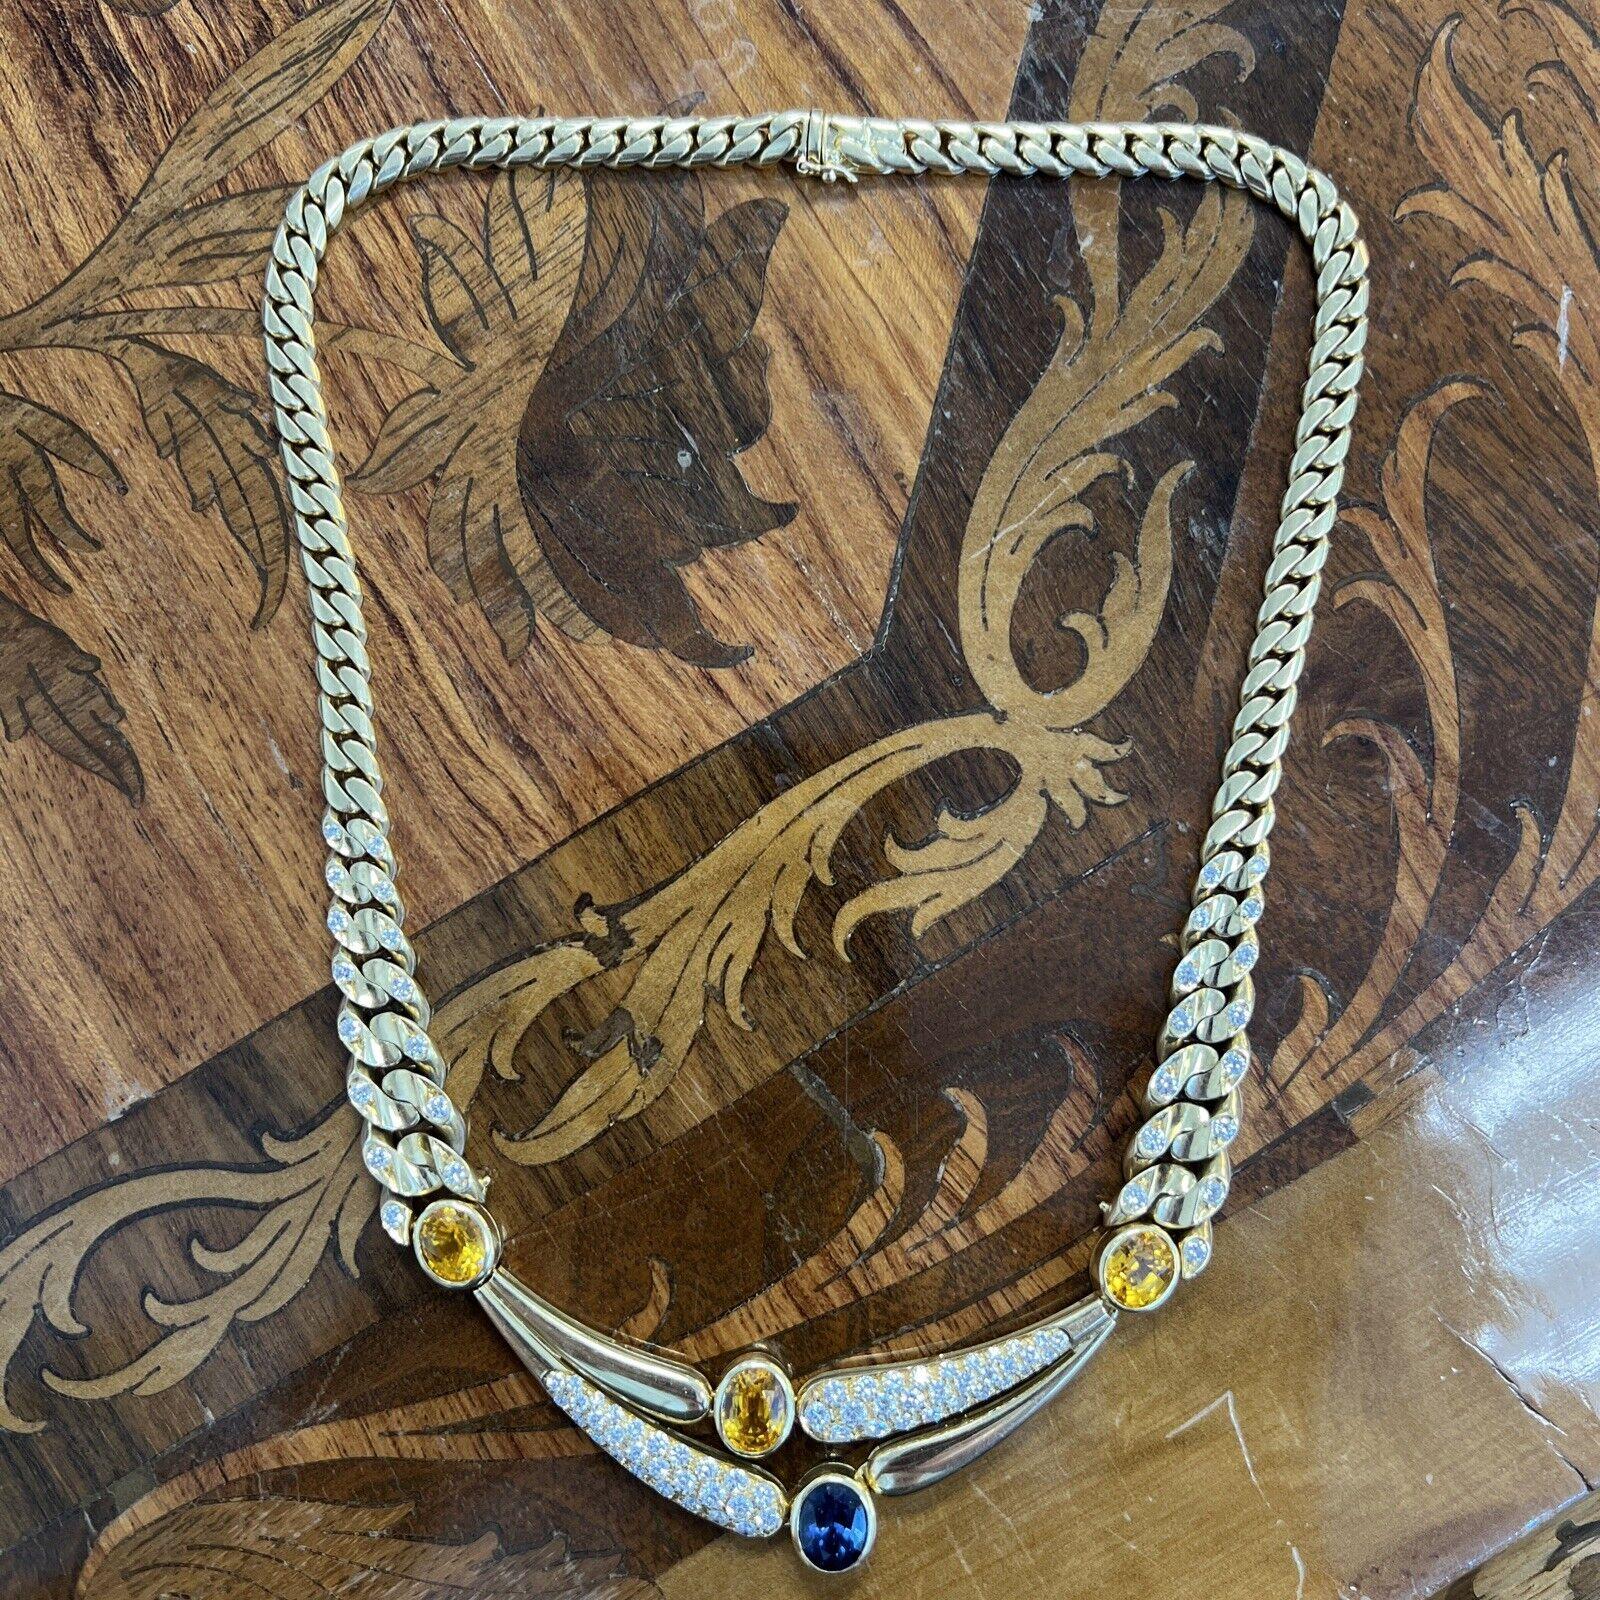 Bvlgari Italy 18k Yellow Gold, Diamond, Yellow & Blue Sapphire Curb Link Necklace Vintage 1970s

Here is your chance to purchase a beautiful and highly collectible designer necklace.  Truly a great piece at a great price! 

Details:
Size : 16.5